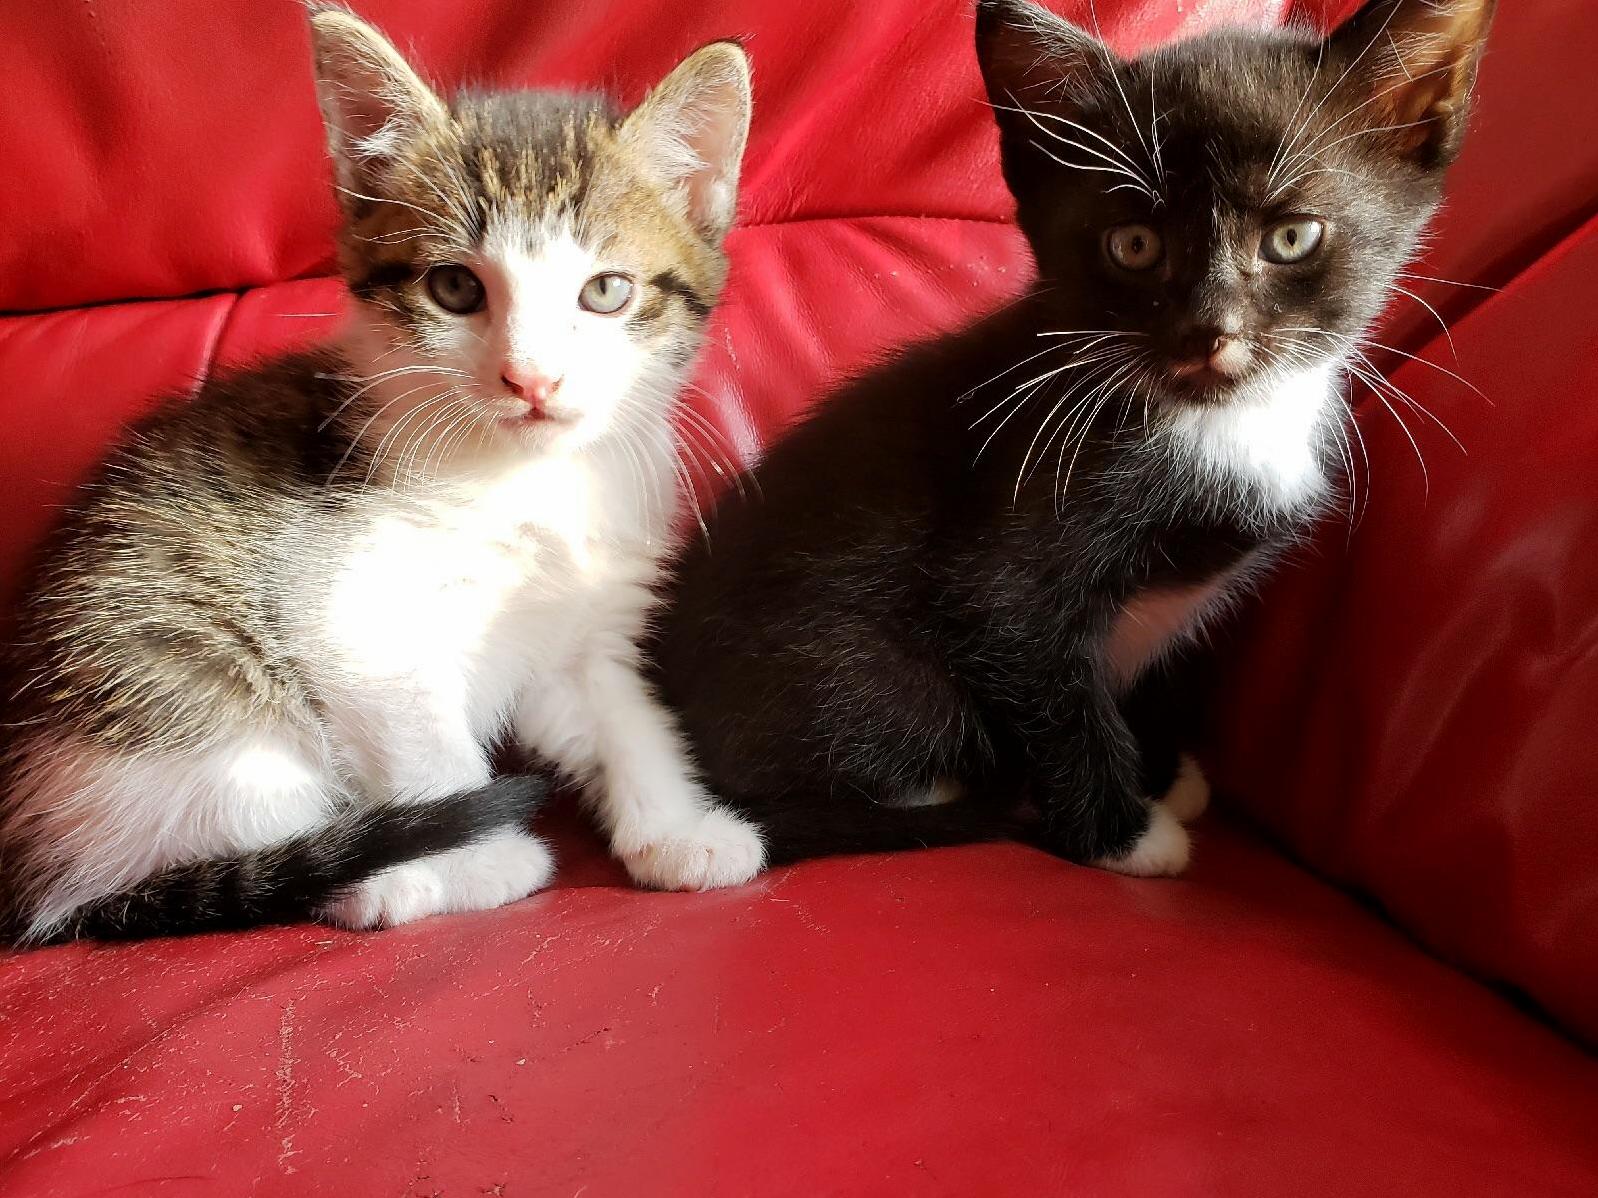 Out soon to be baby on the left, and foster kitten on the right. info in comments.